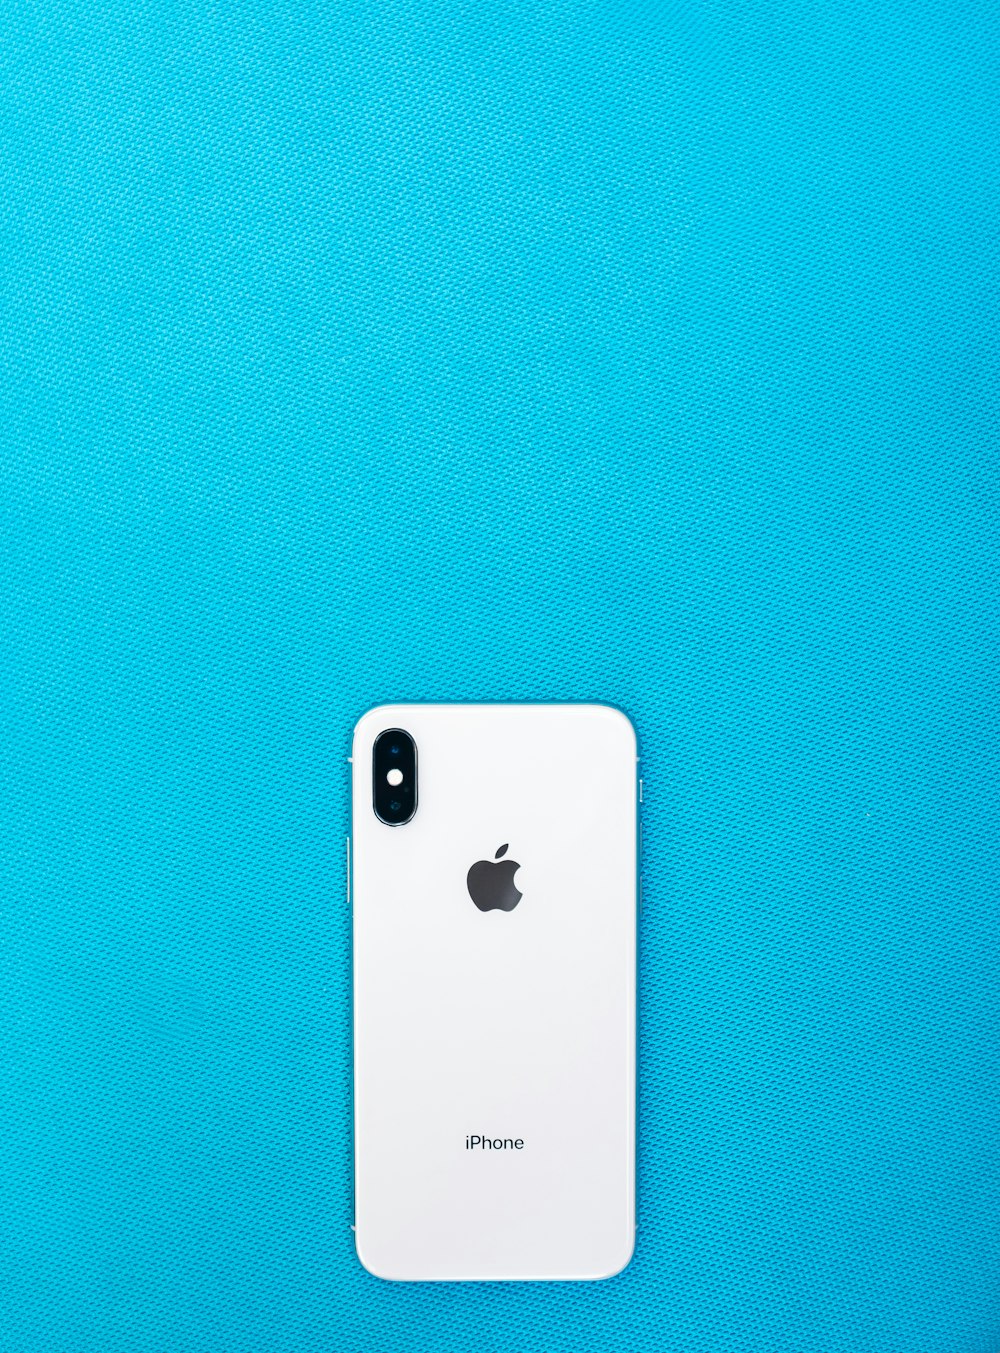 post-2017 iPhone on teal surface